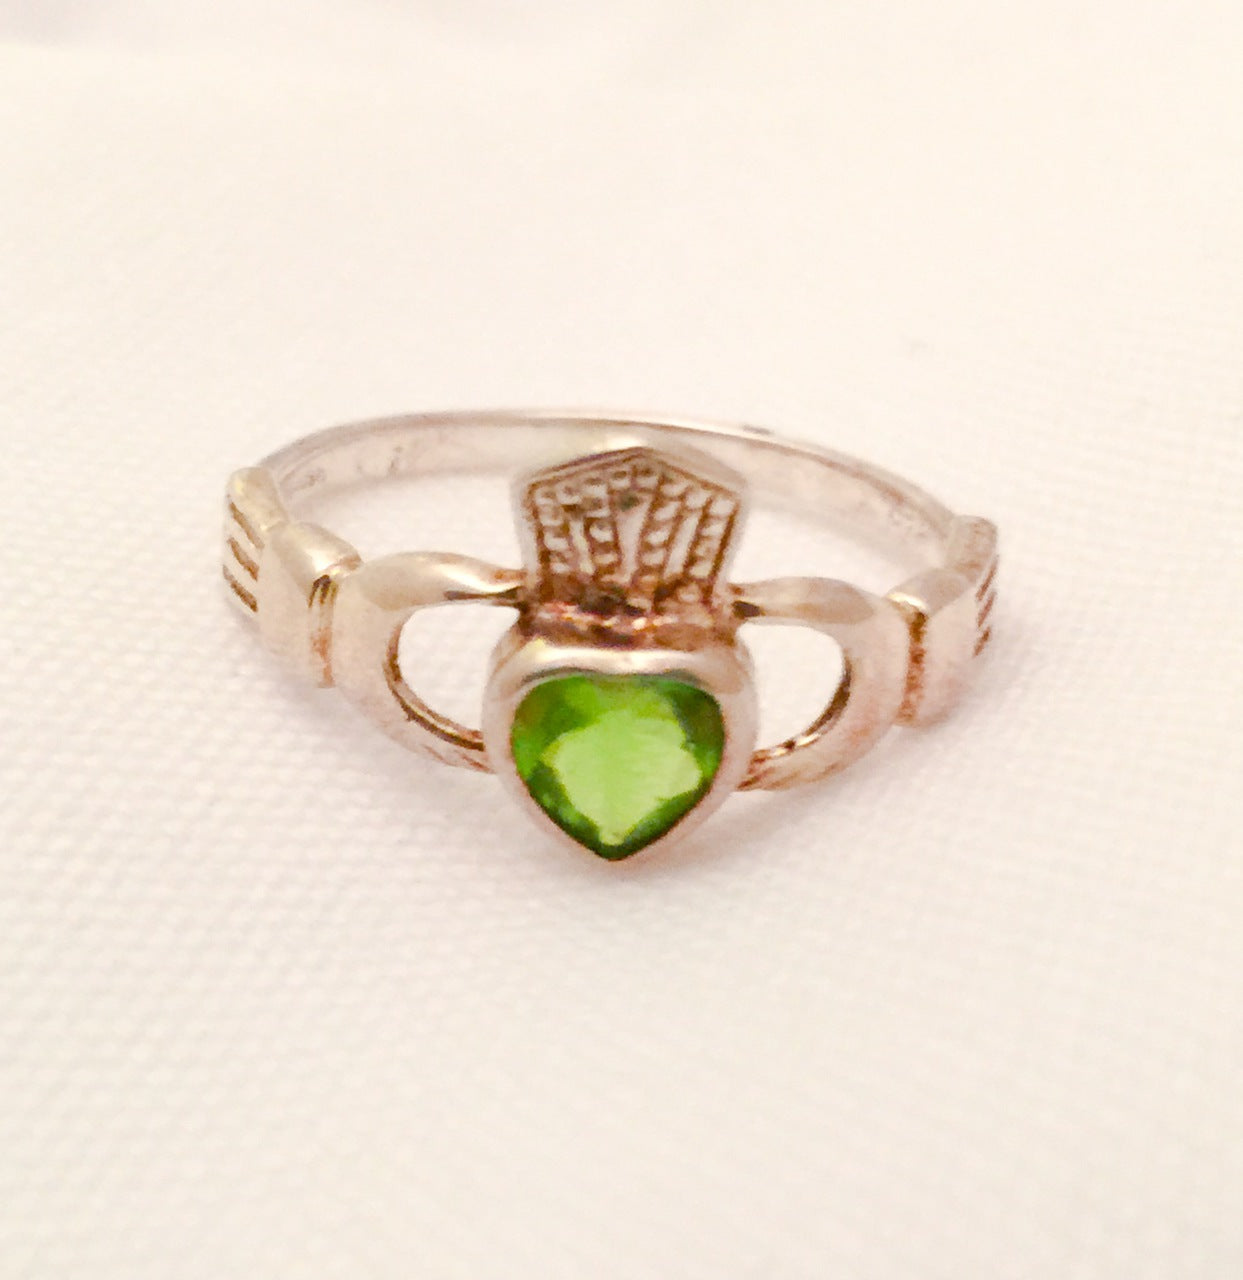 Vintage Claddagh Sterling Silver Ring with Emerald Crystal Size 7.25